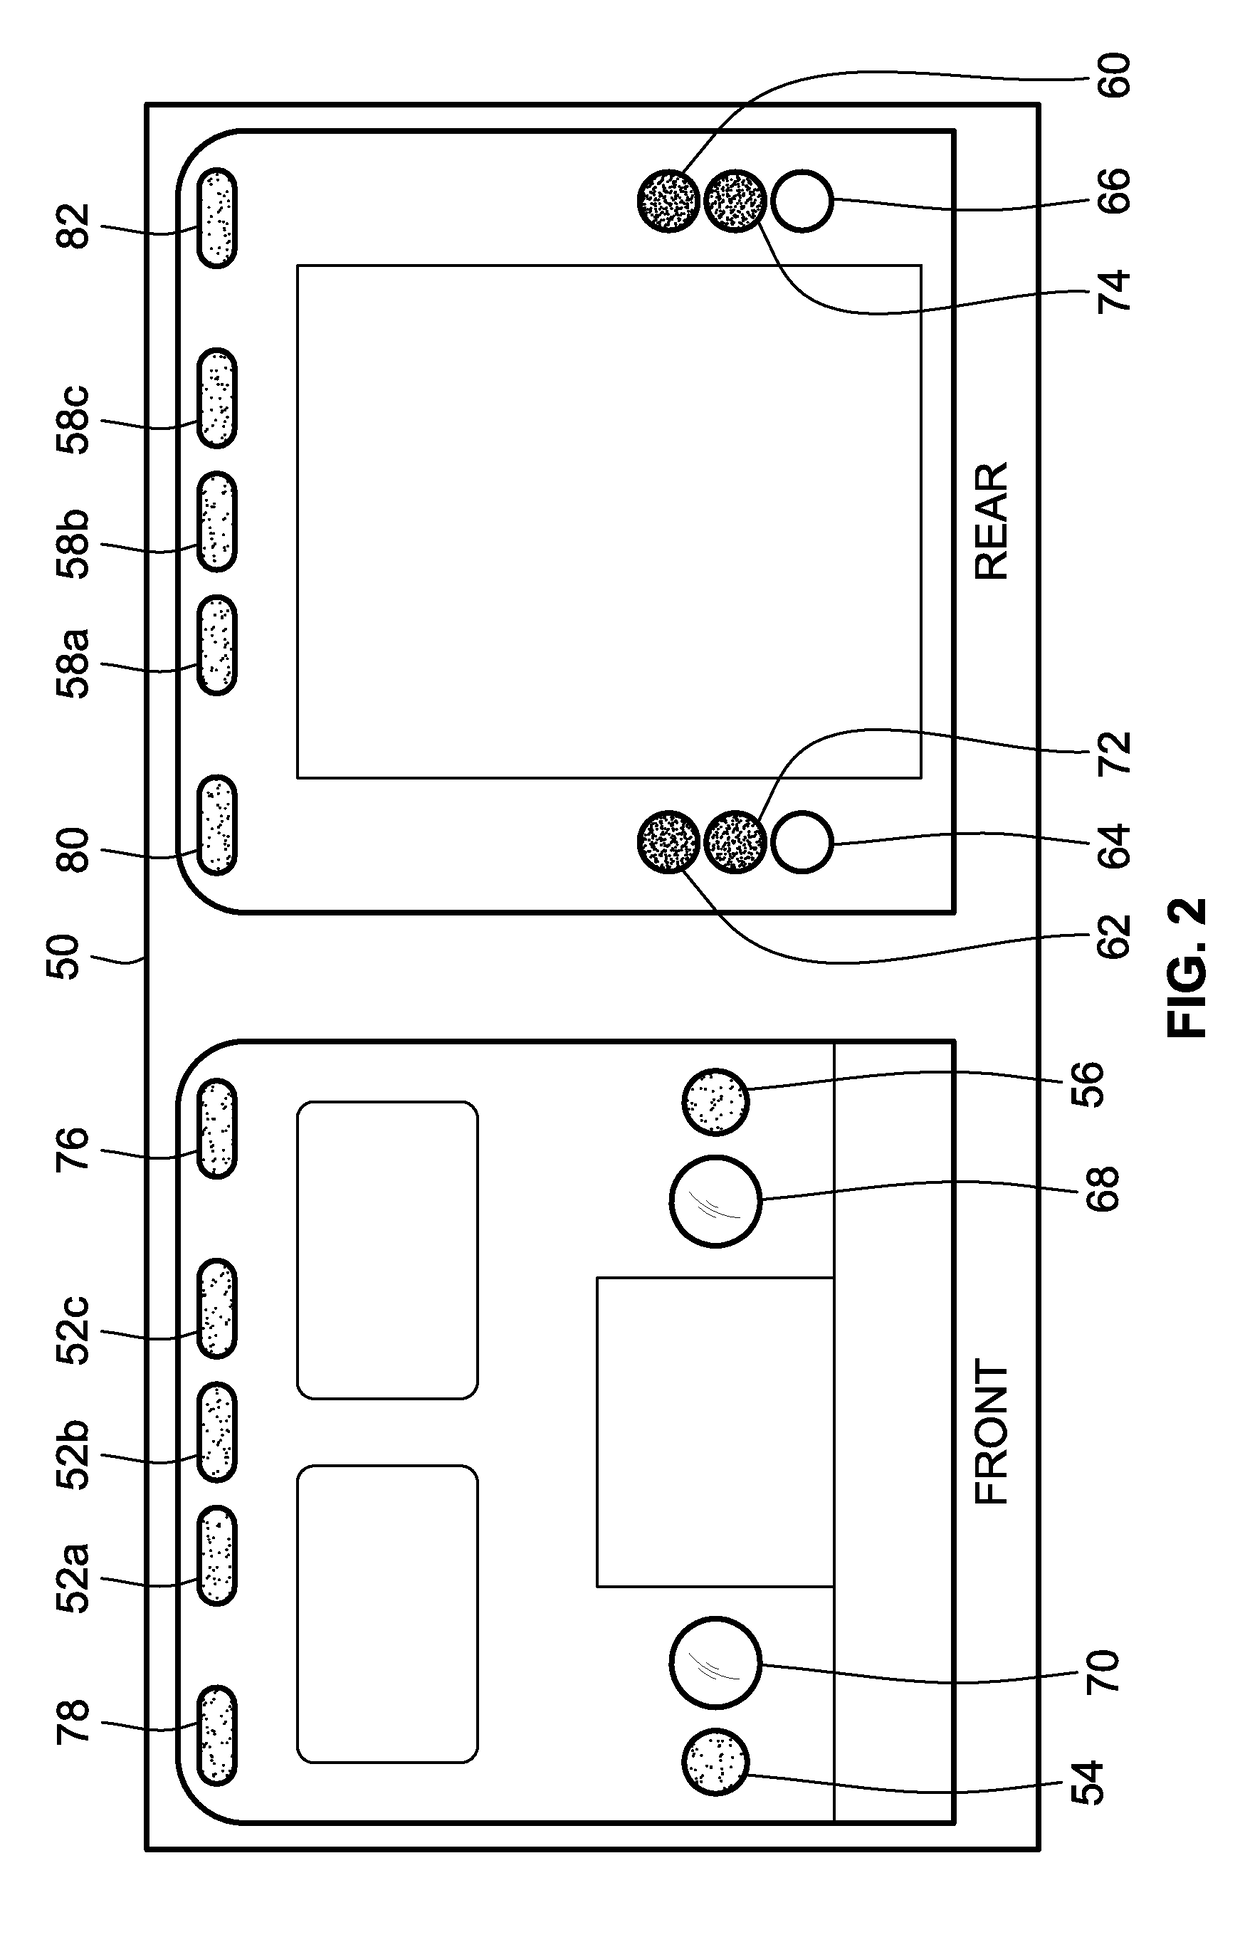 System and method for vehicle system diagnostics, reporting, and dot compliance